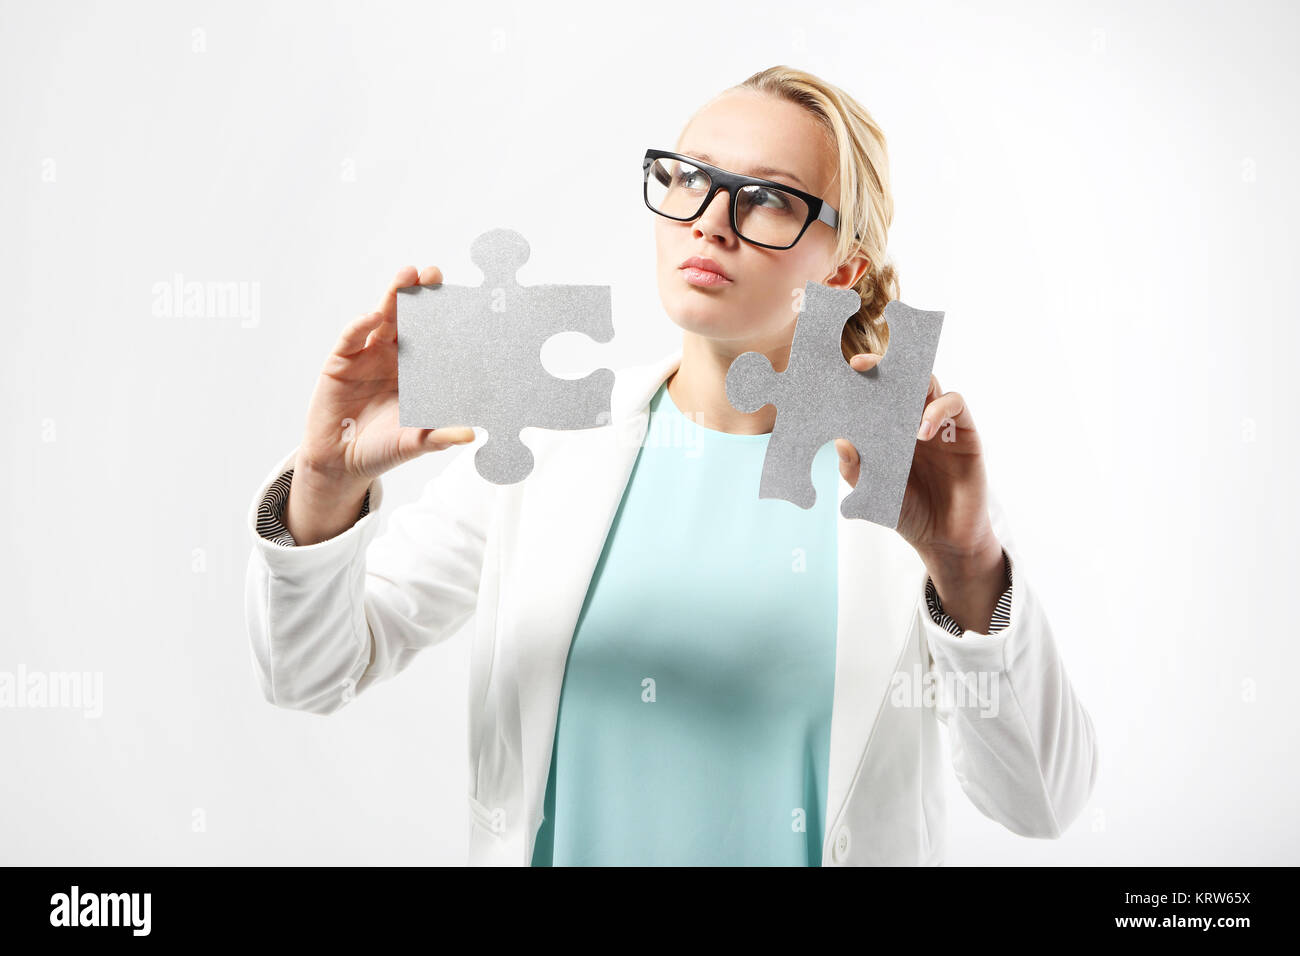 an attractive woman in business attire matches the pieces of the puzzle. Stock Photo